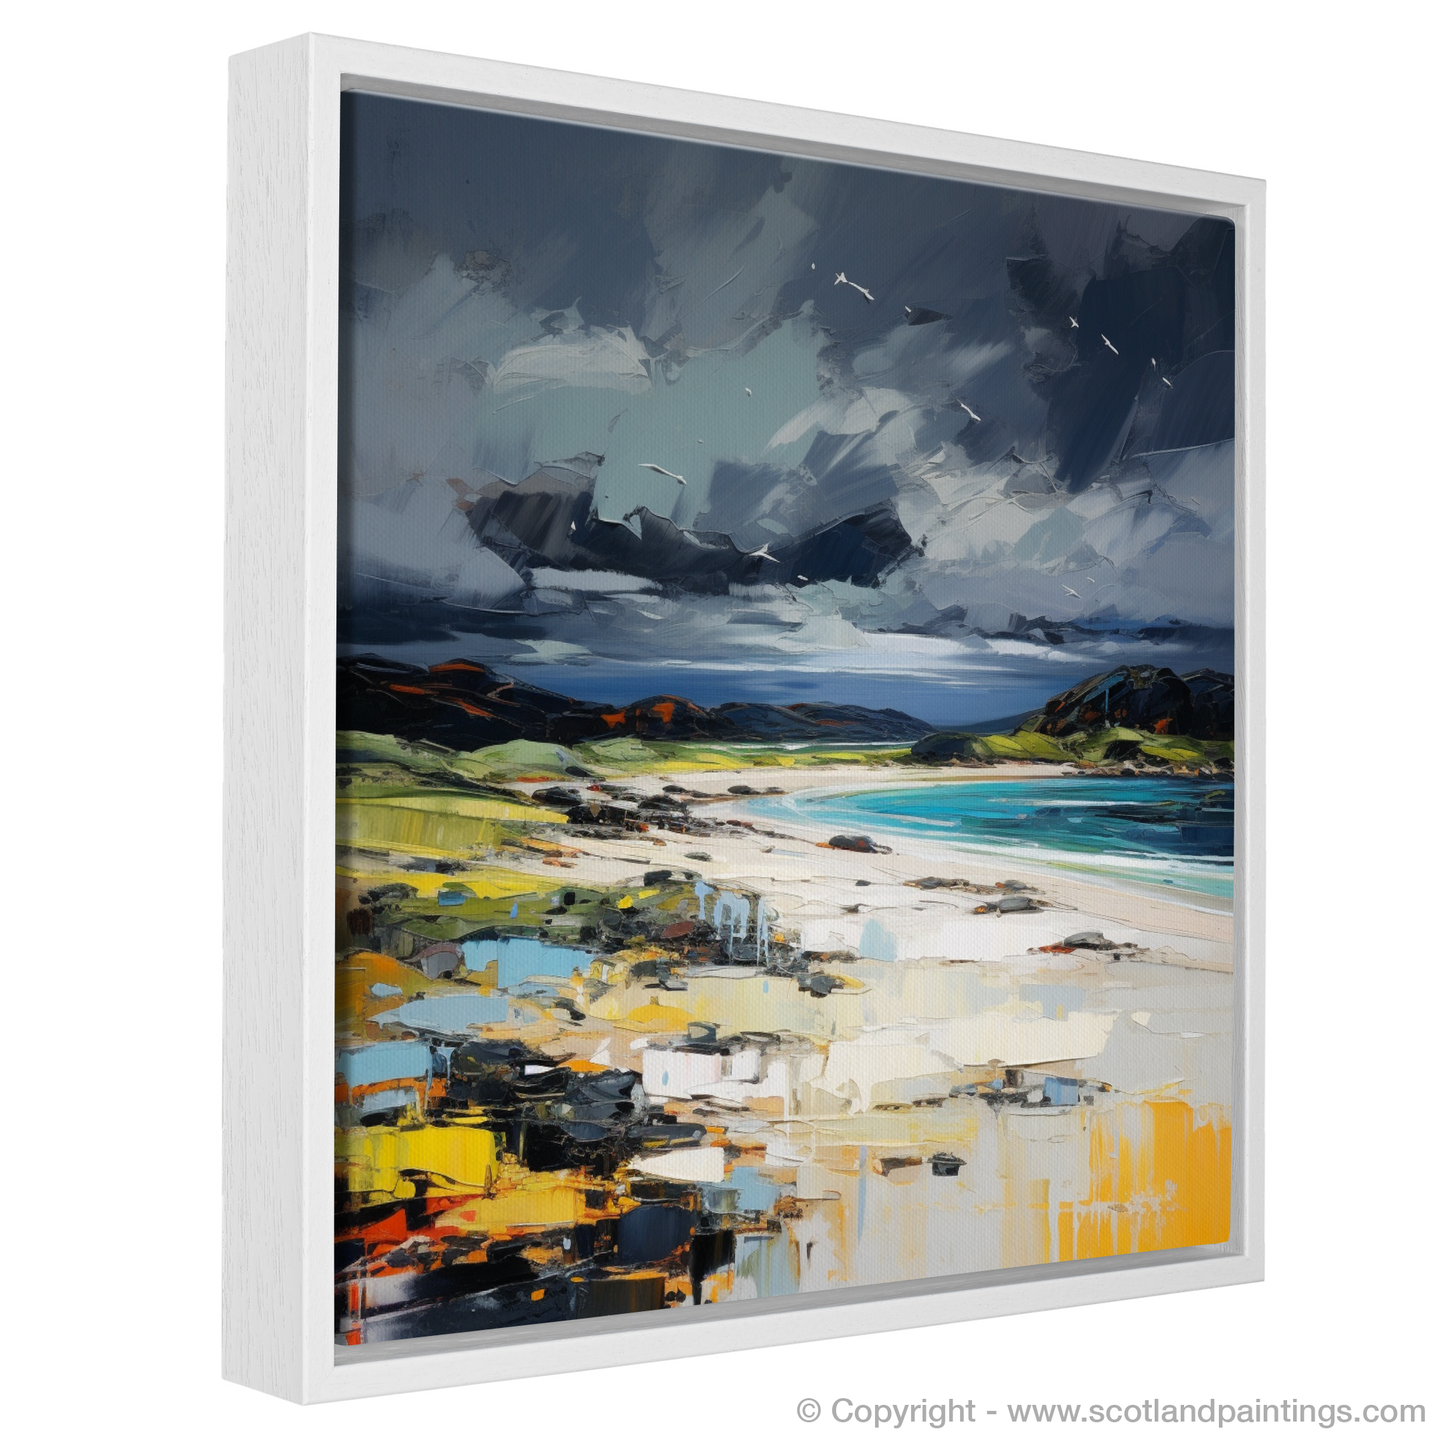 Painting and Art Print of Arisaig Beach with a stormy sky entitled "Storm's Embrace on Arisaig Beach".